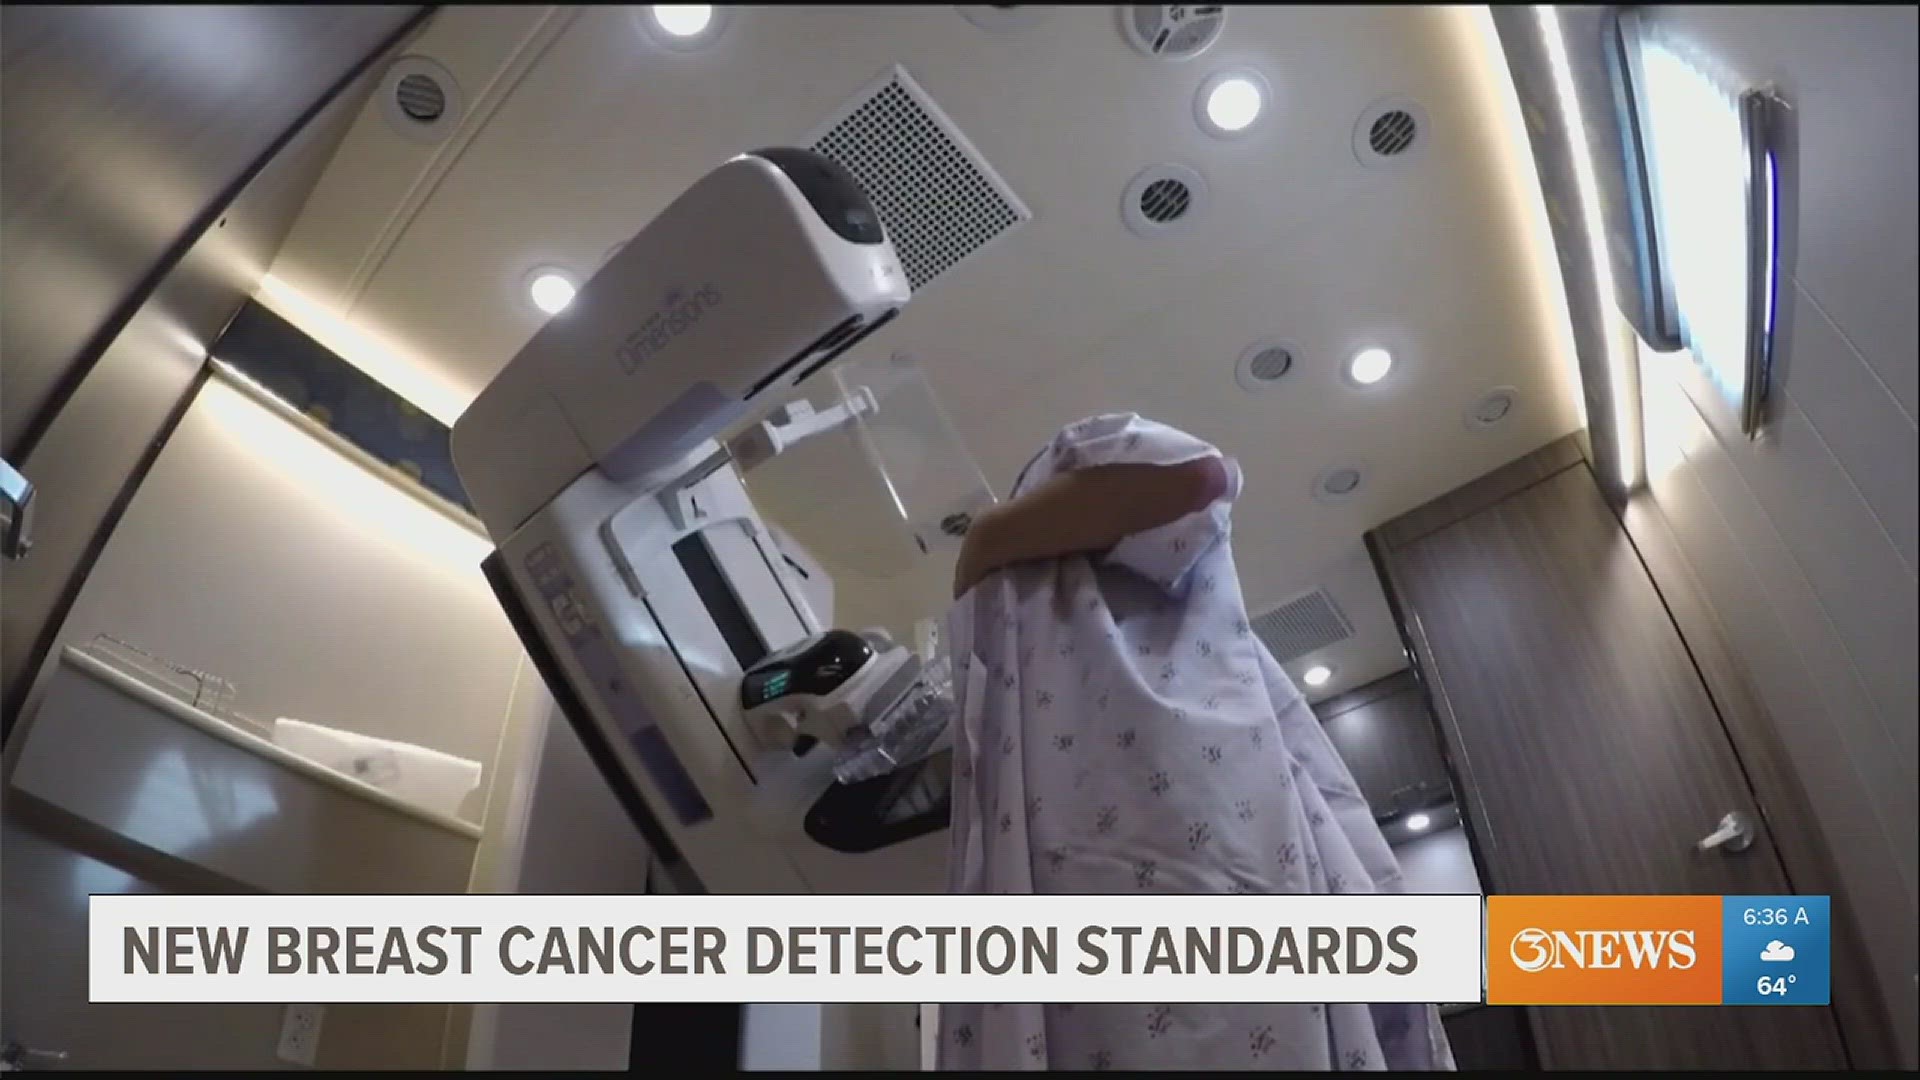 The FDA is going to require mammogram reports to include breast density information. People with dense breasts are 4X more likely to develop breast cancer.